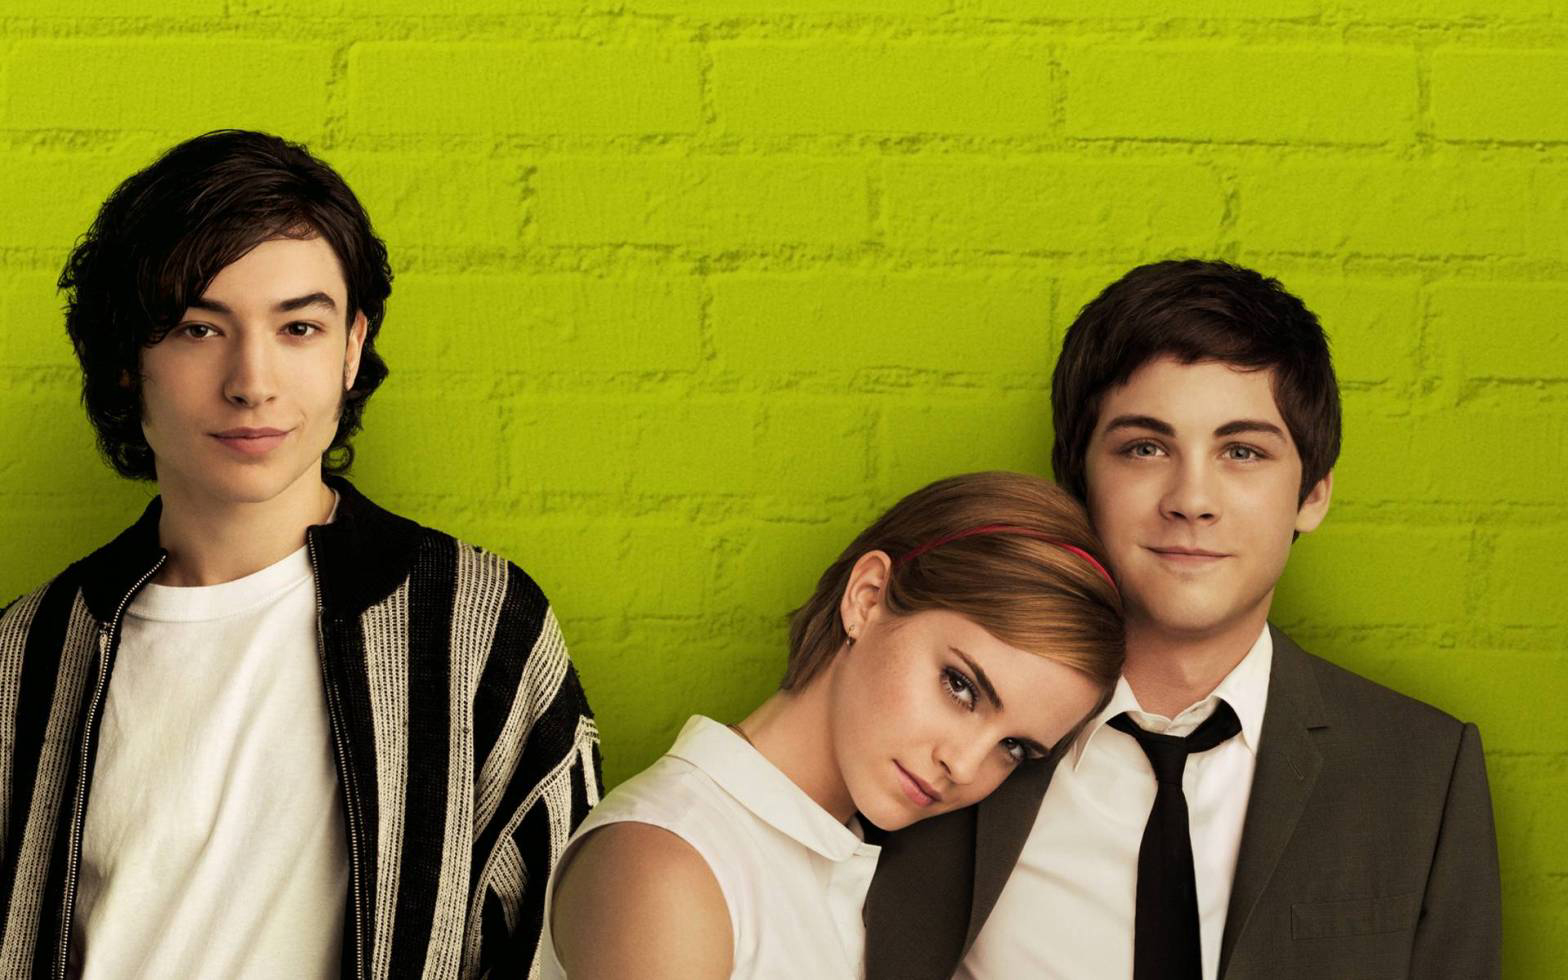 The Perks of Being a Wallflower / The Perks of Being a Wallflower (2012)